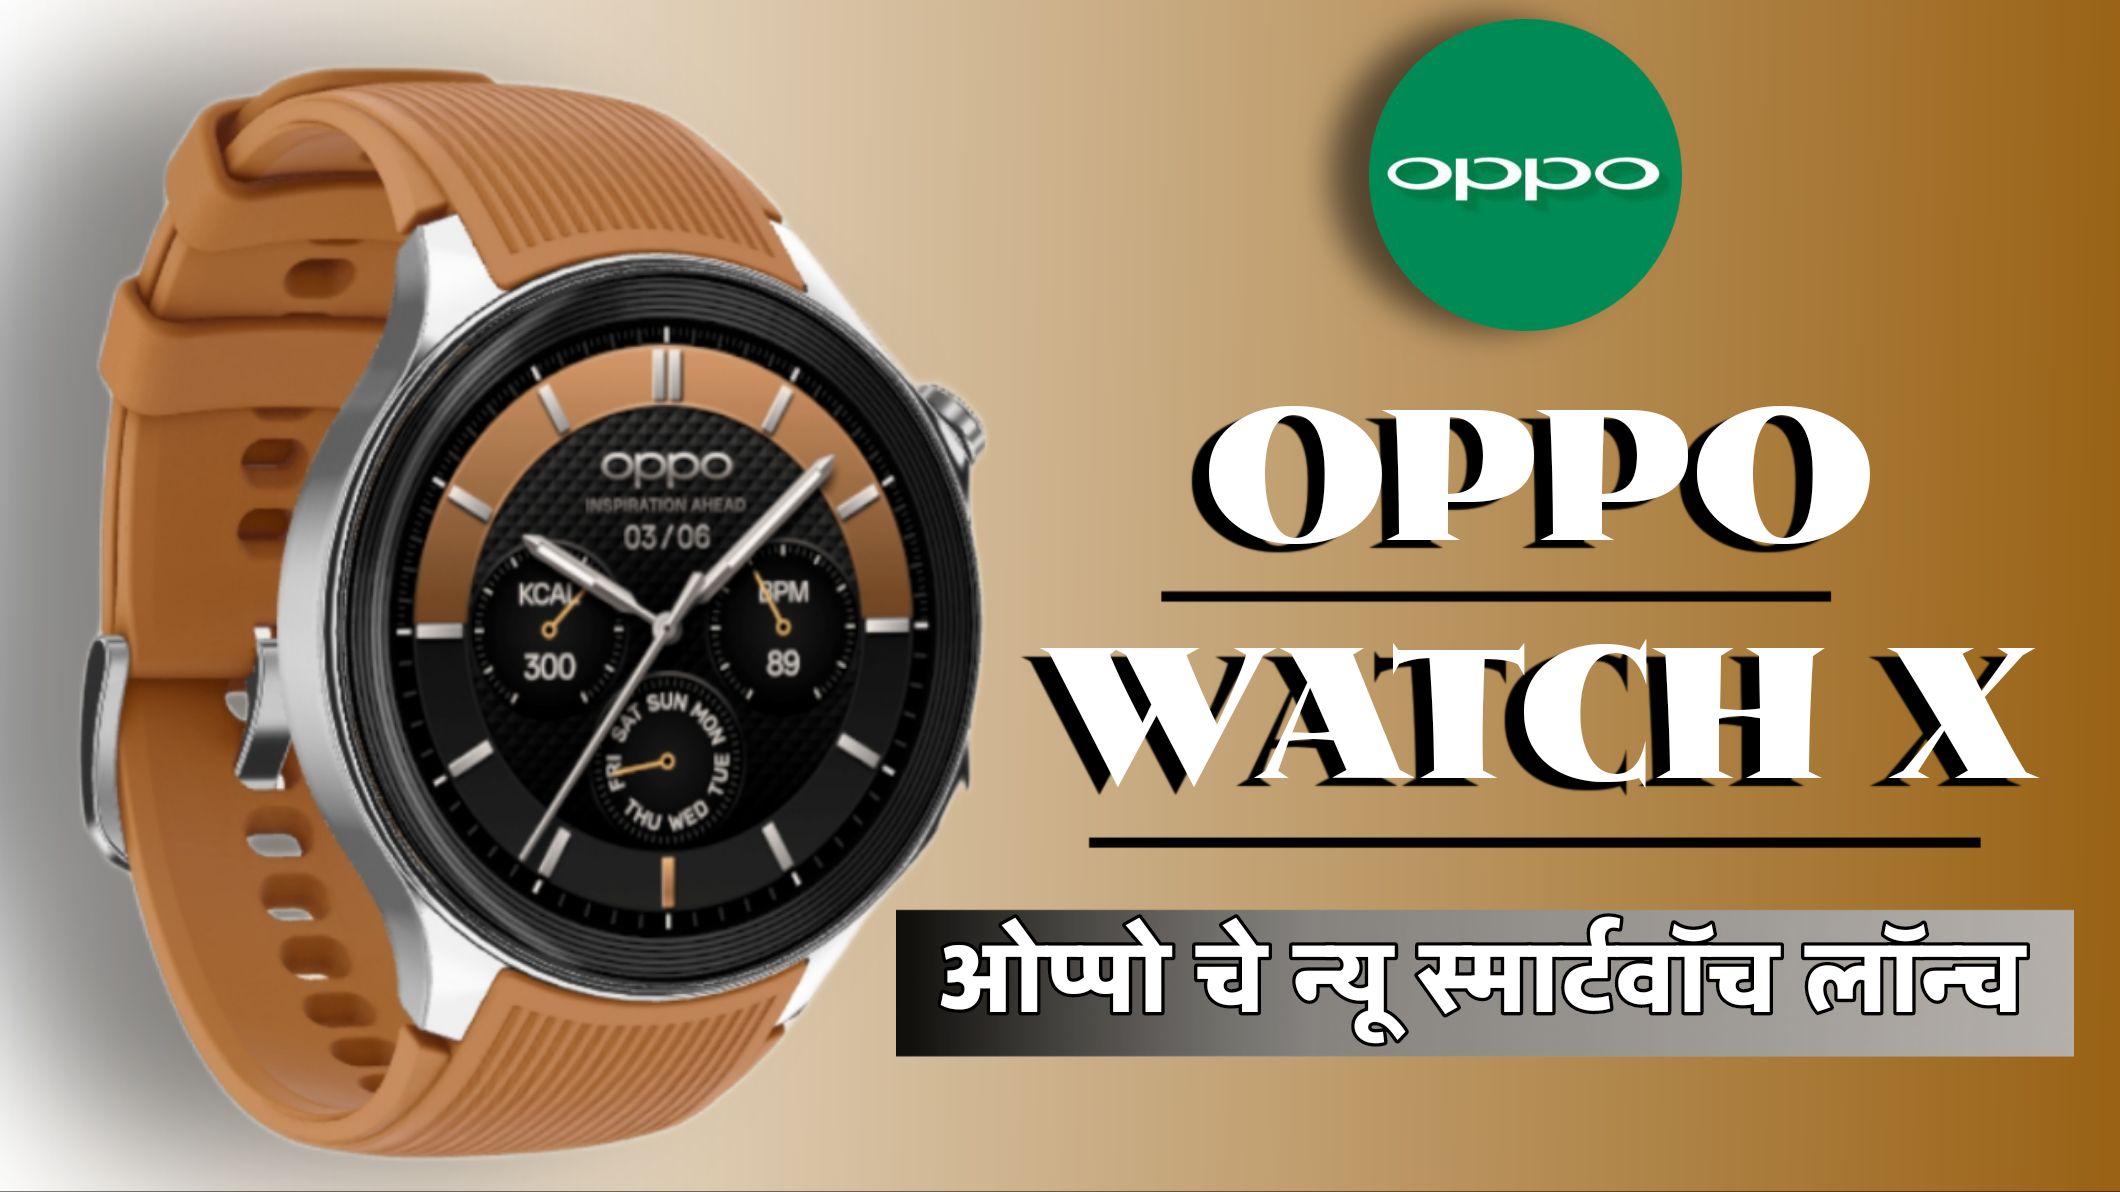 OPPO Watch X Price in India